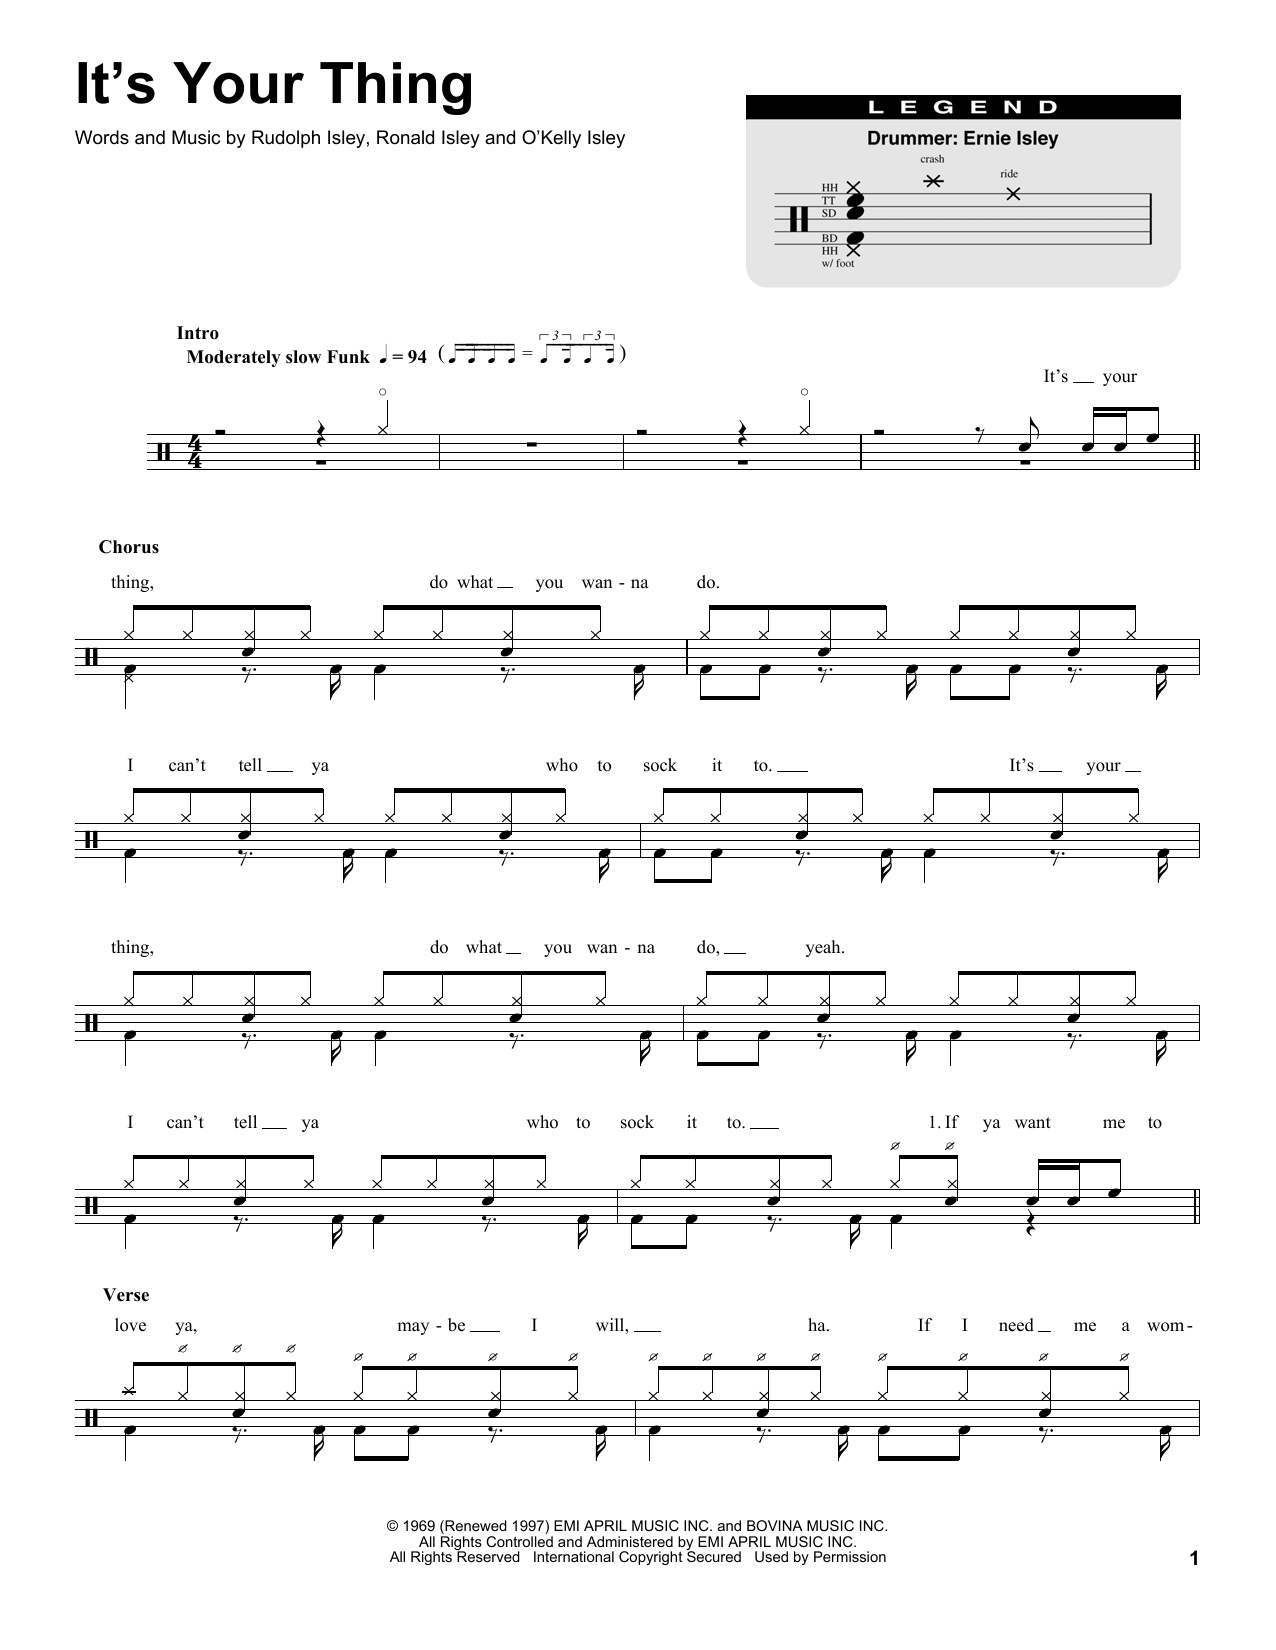 Download The Isley Brothers It's Your Thing Sheet Music